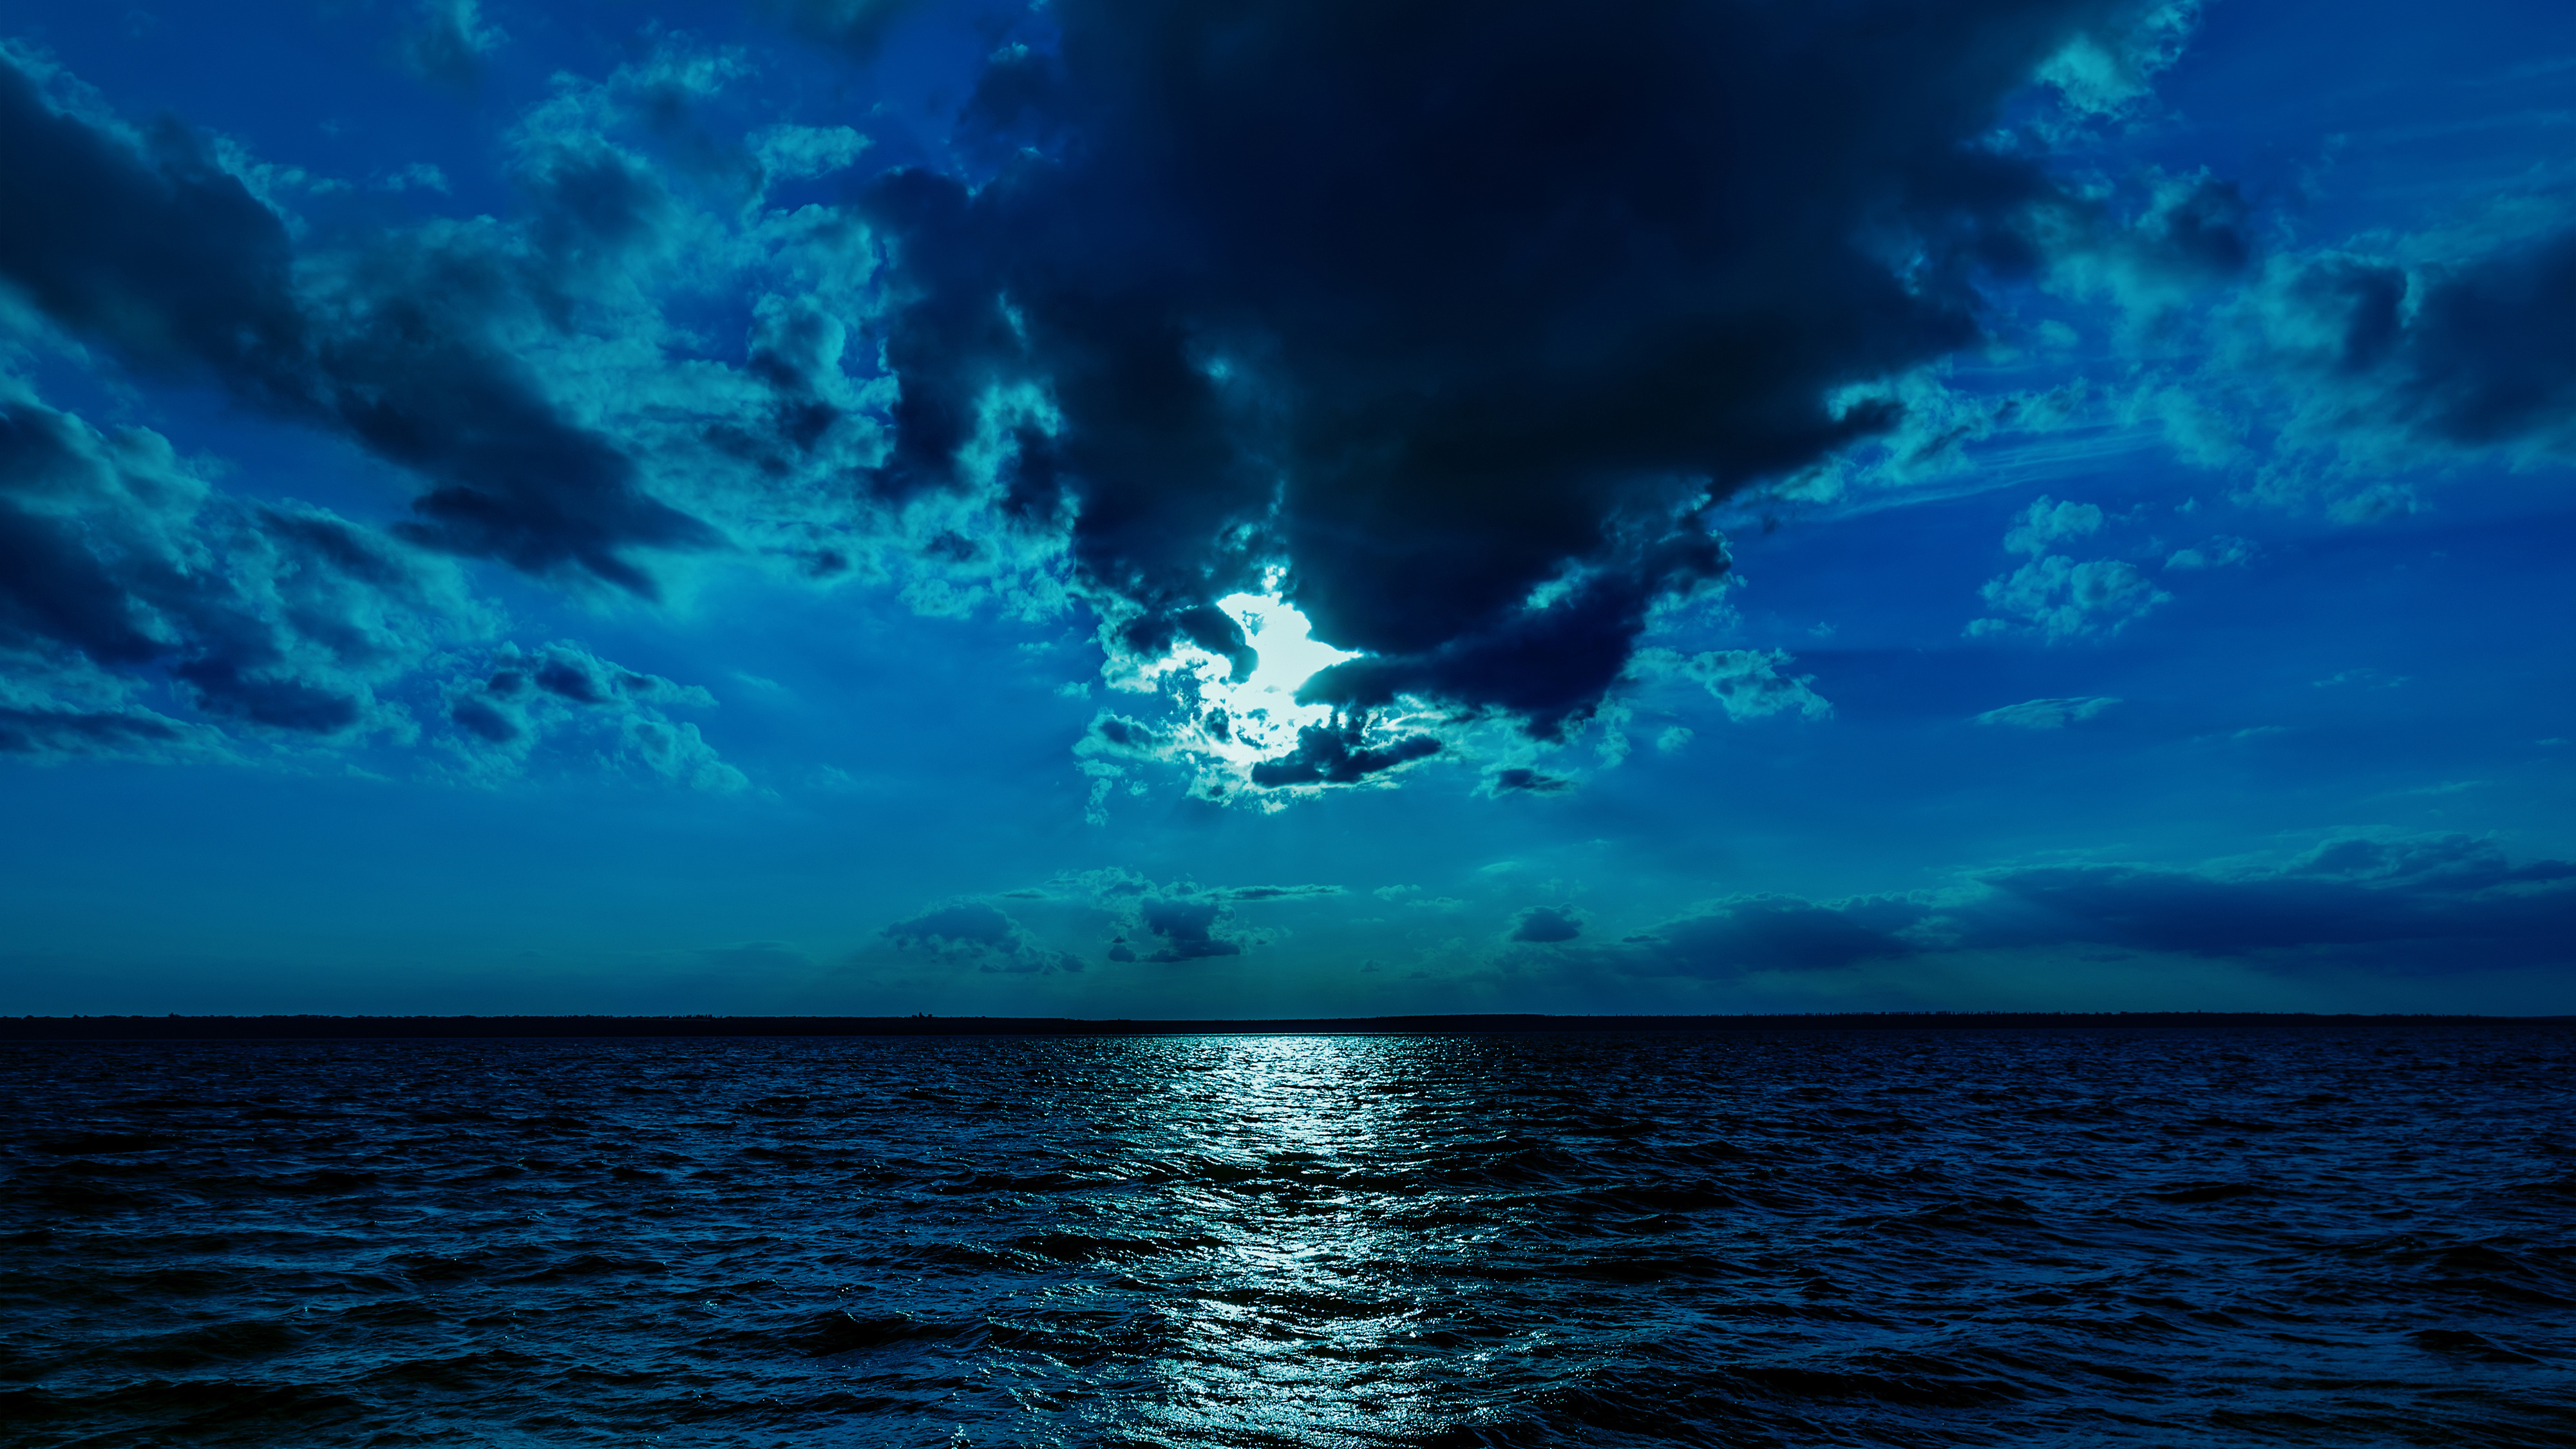 Night Moon Sea Sky Blue 4k Hd Nature 4k Wallpapers Images Backgrounds Photos And Pictures